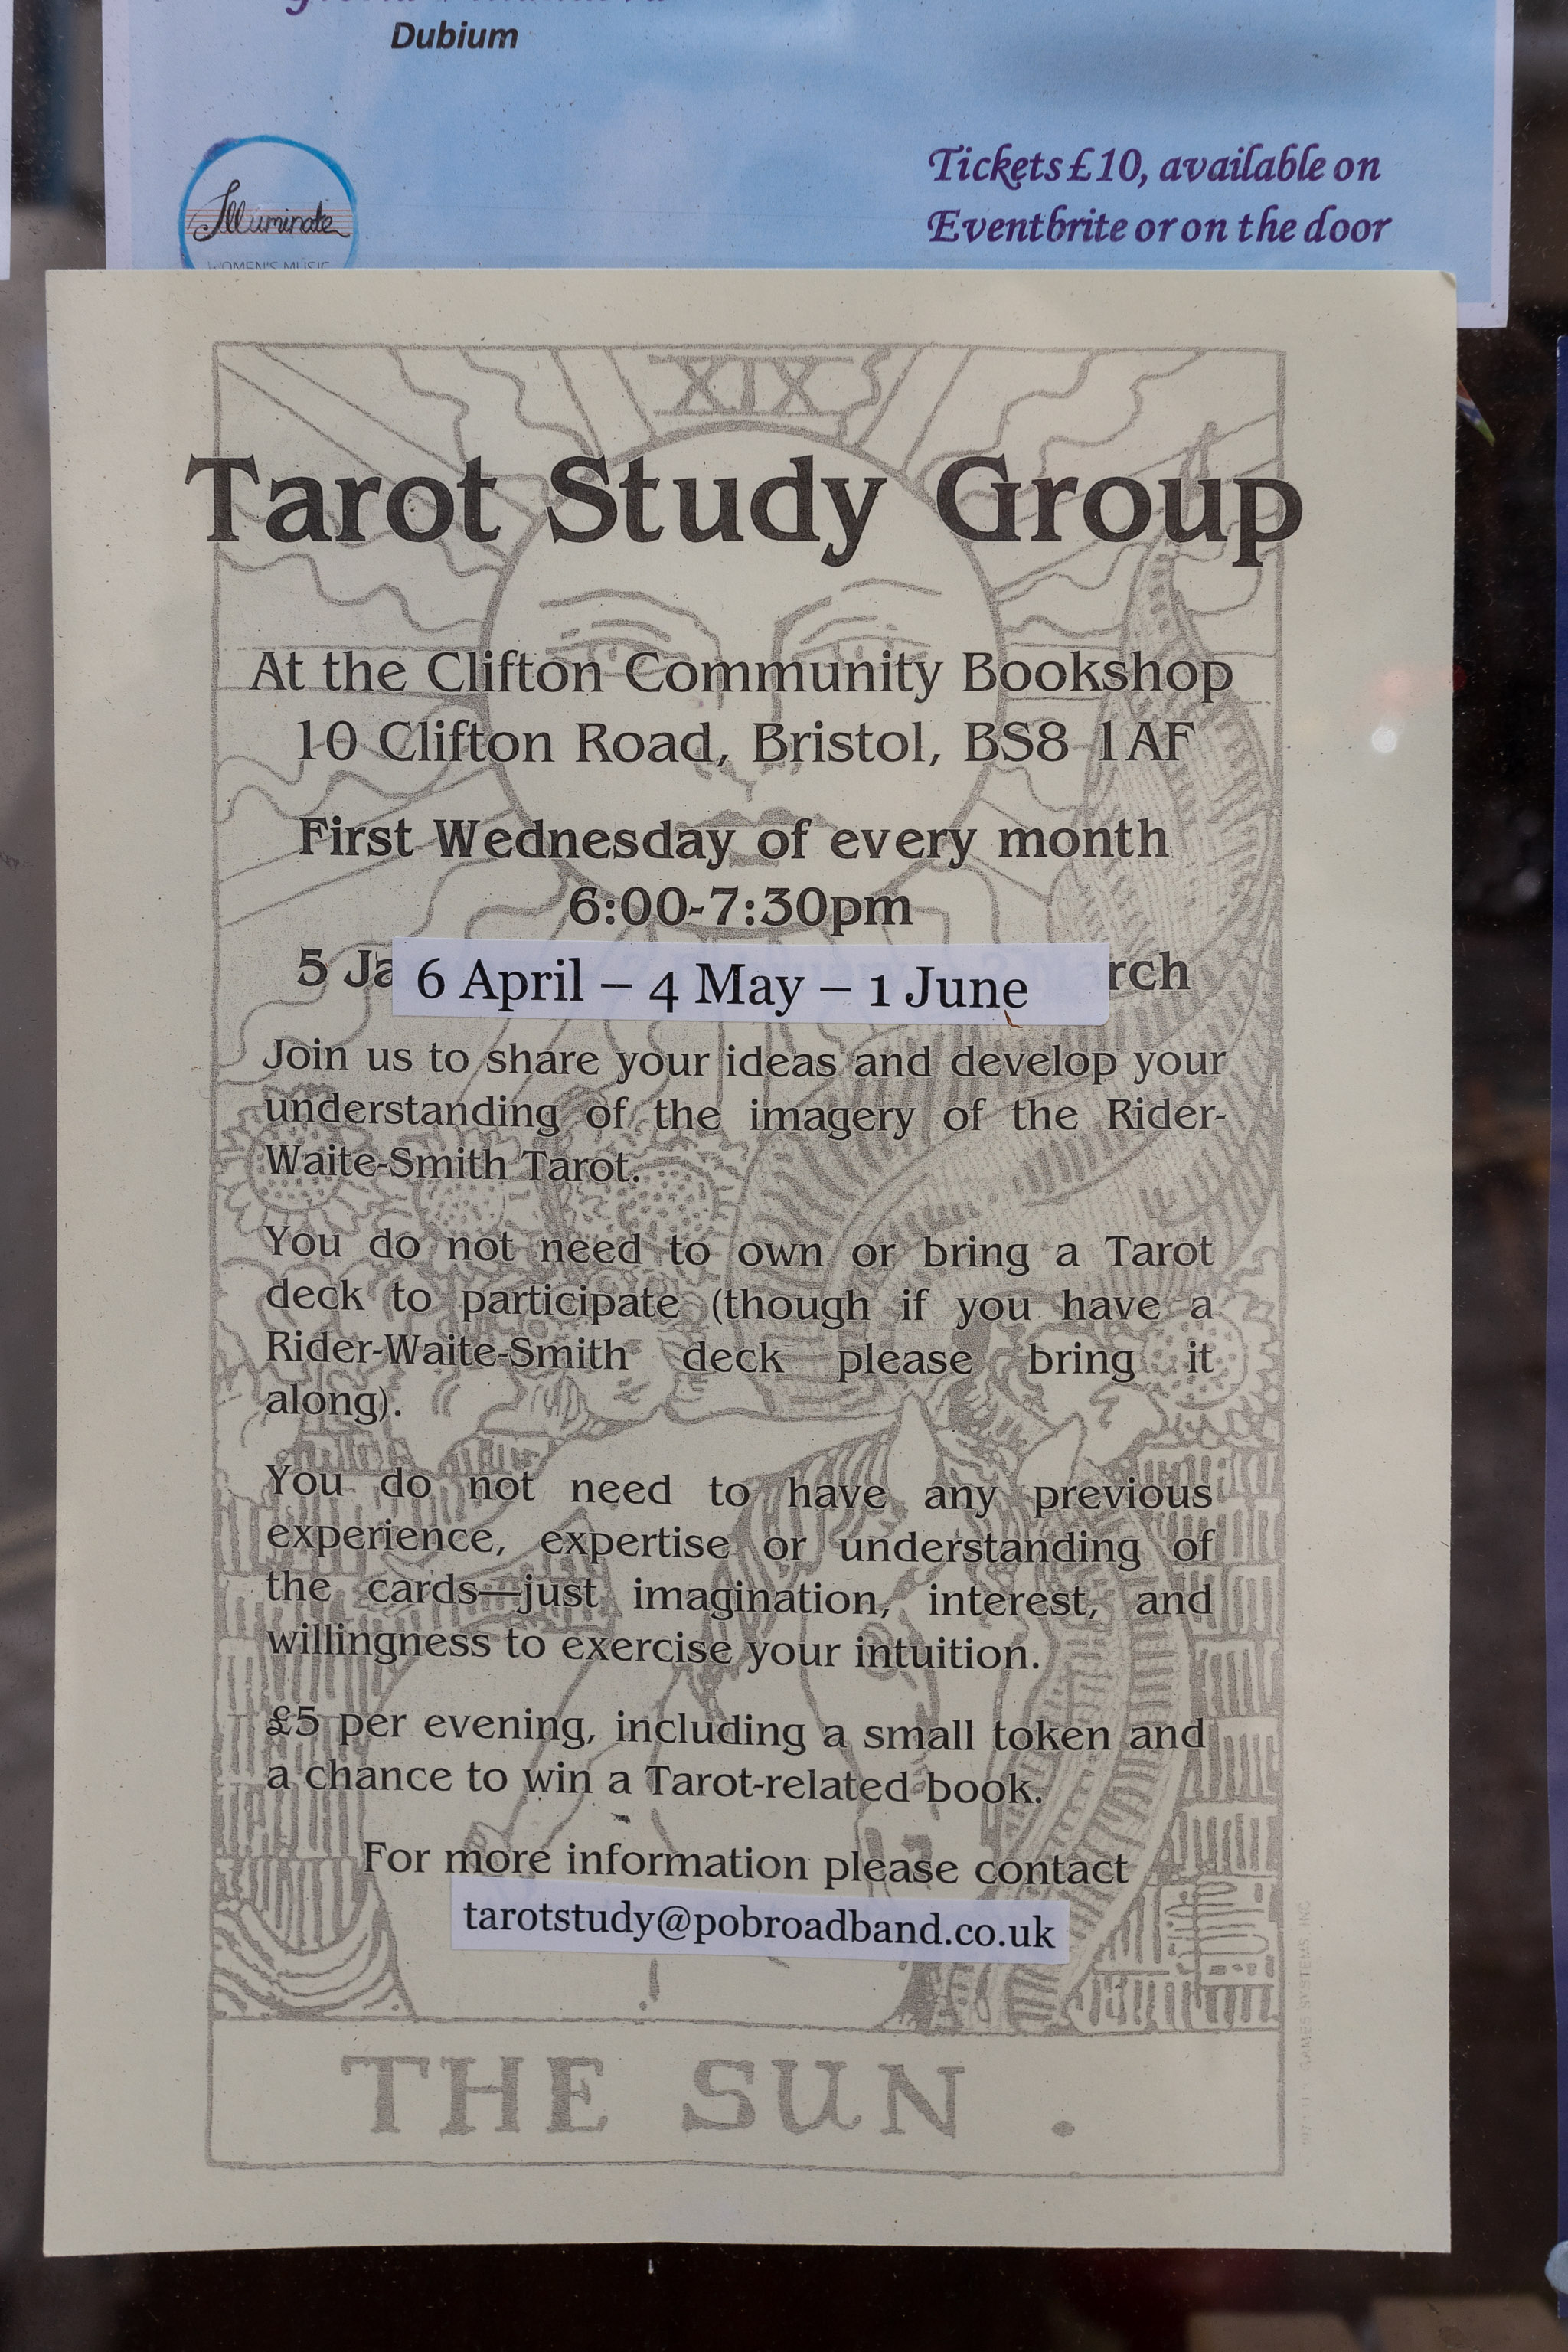 Study Group
From the window of the community bookshop. A book I'm vaguely thinking of writing involves the Tarot, and I'm a little tempted to go on this.
